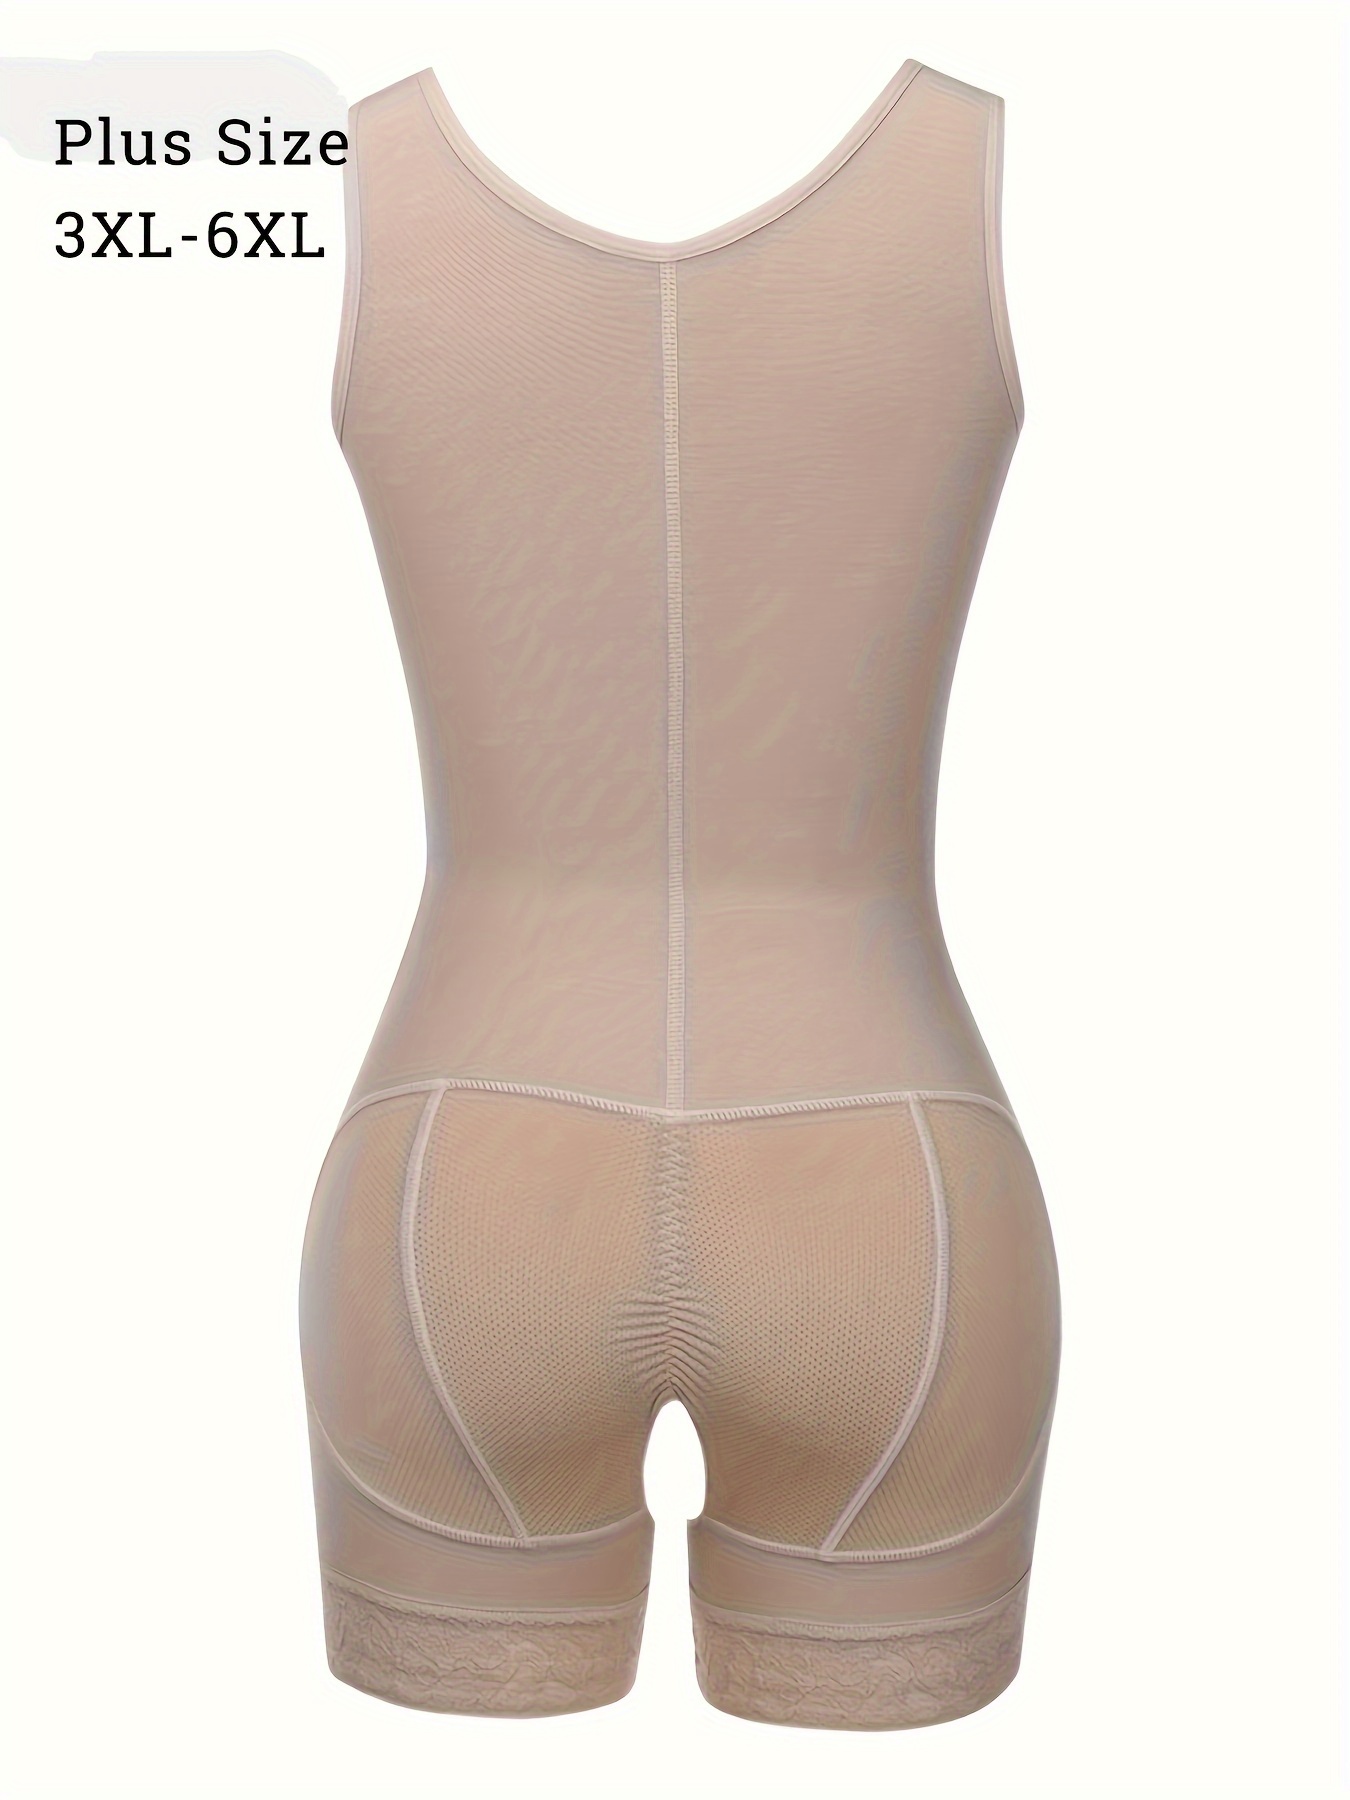 Women's Sexy Shapewear Bodysuit, Plus Size Lace Trim Open Crotch Compression  Slimmer Body Shaper, Check Out Today's Deals Now